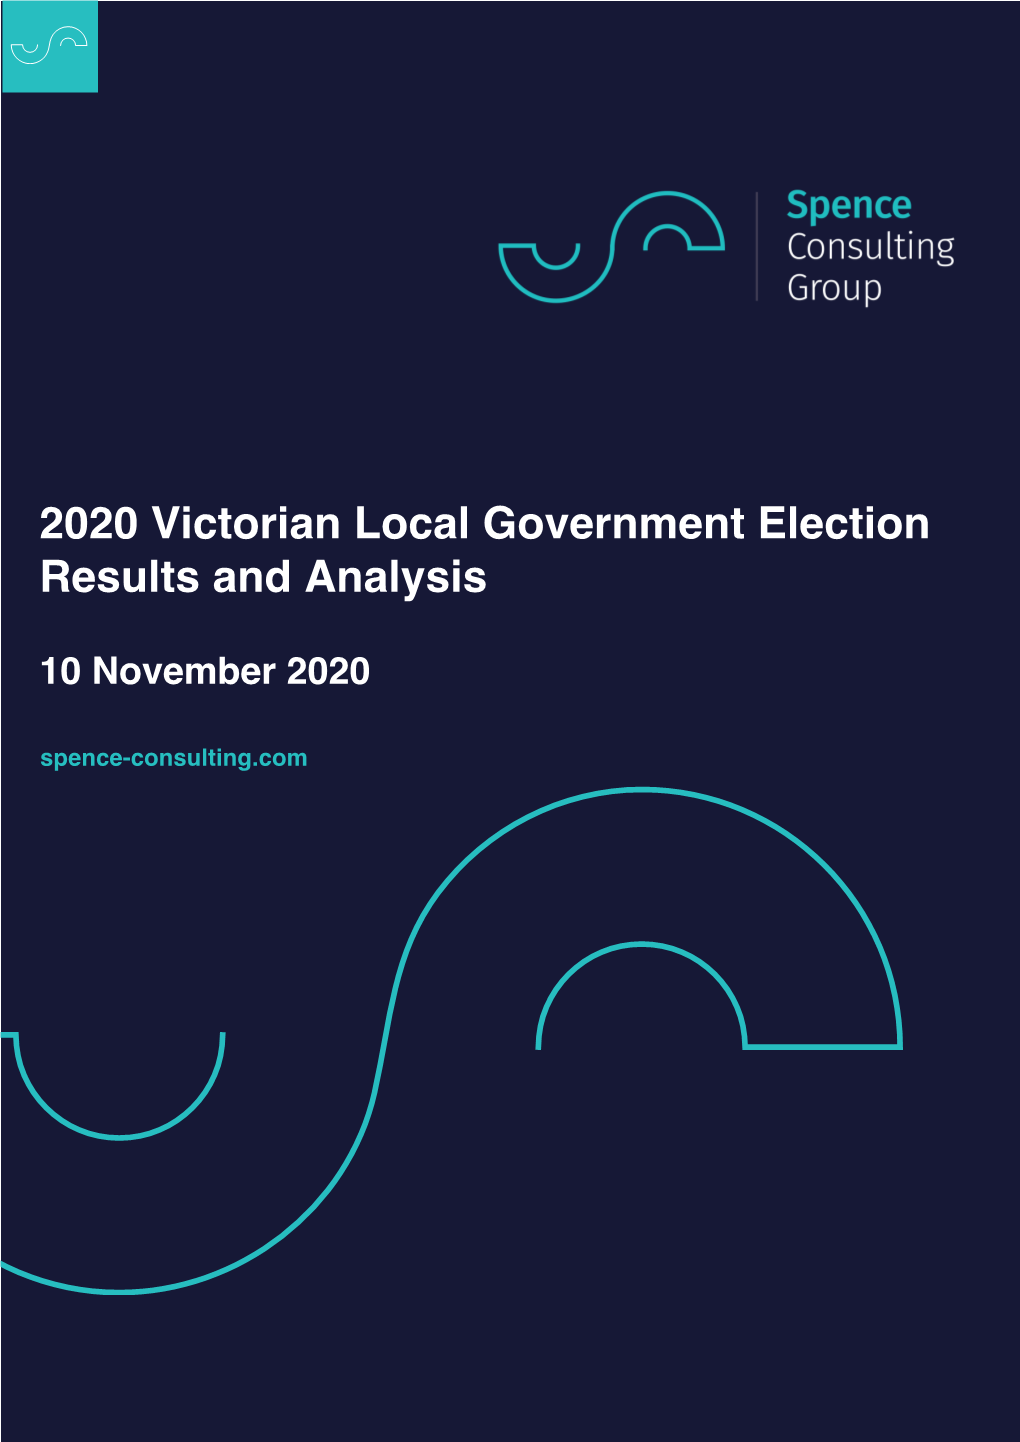 SCG 2020 Victorian Local Government Election Analysis